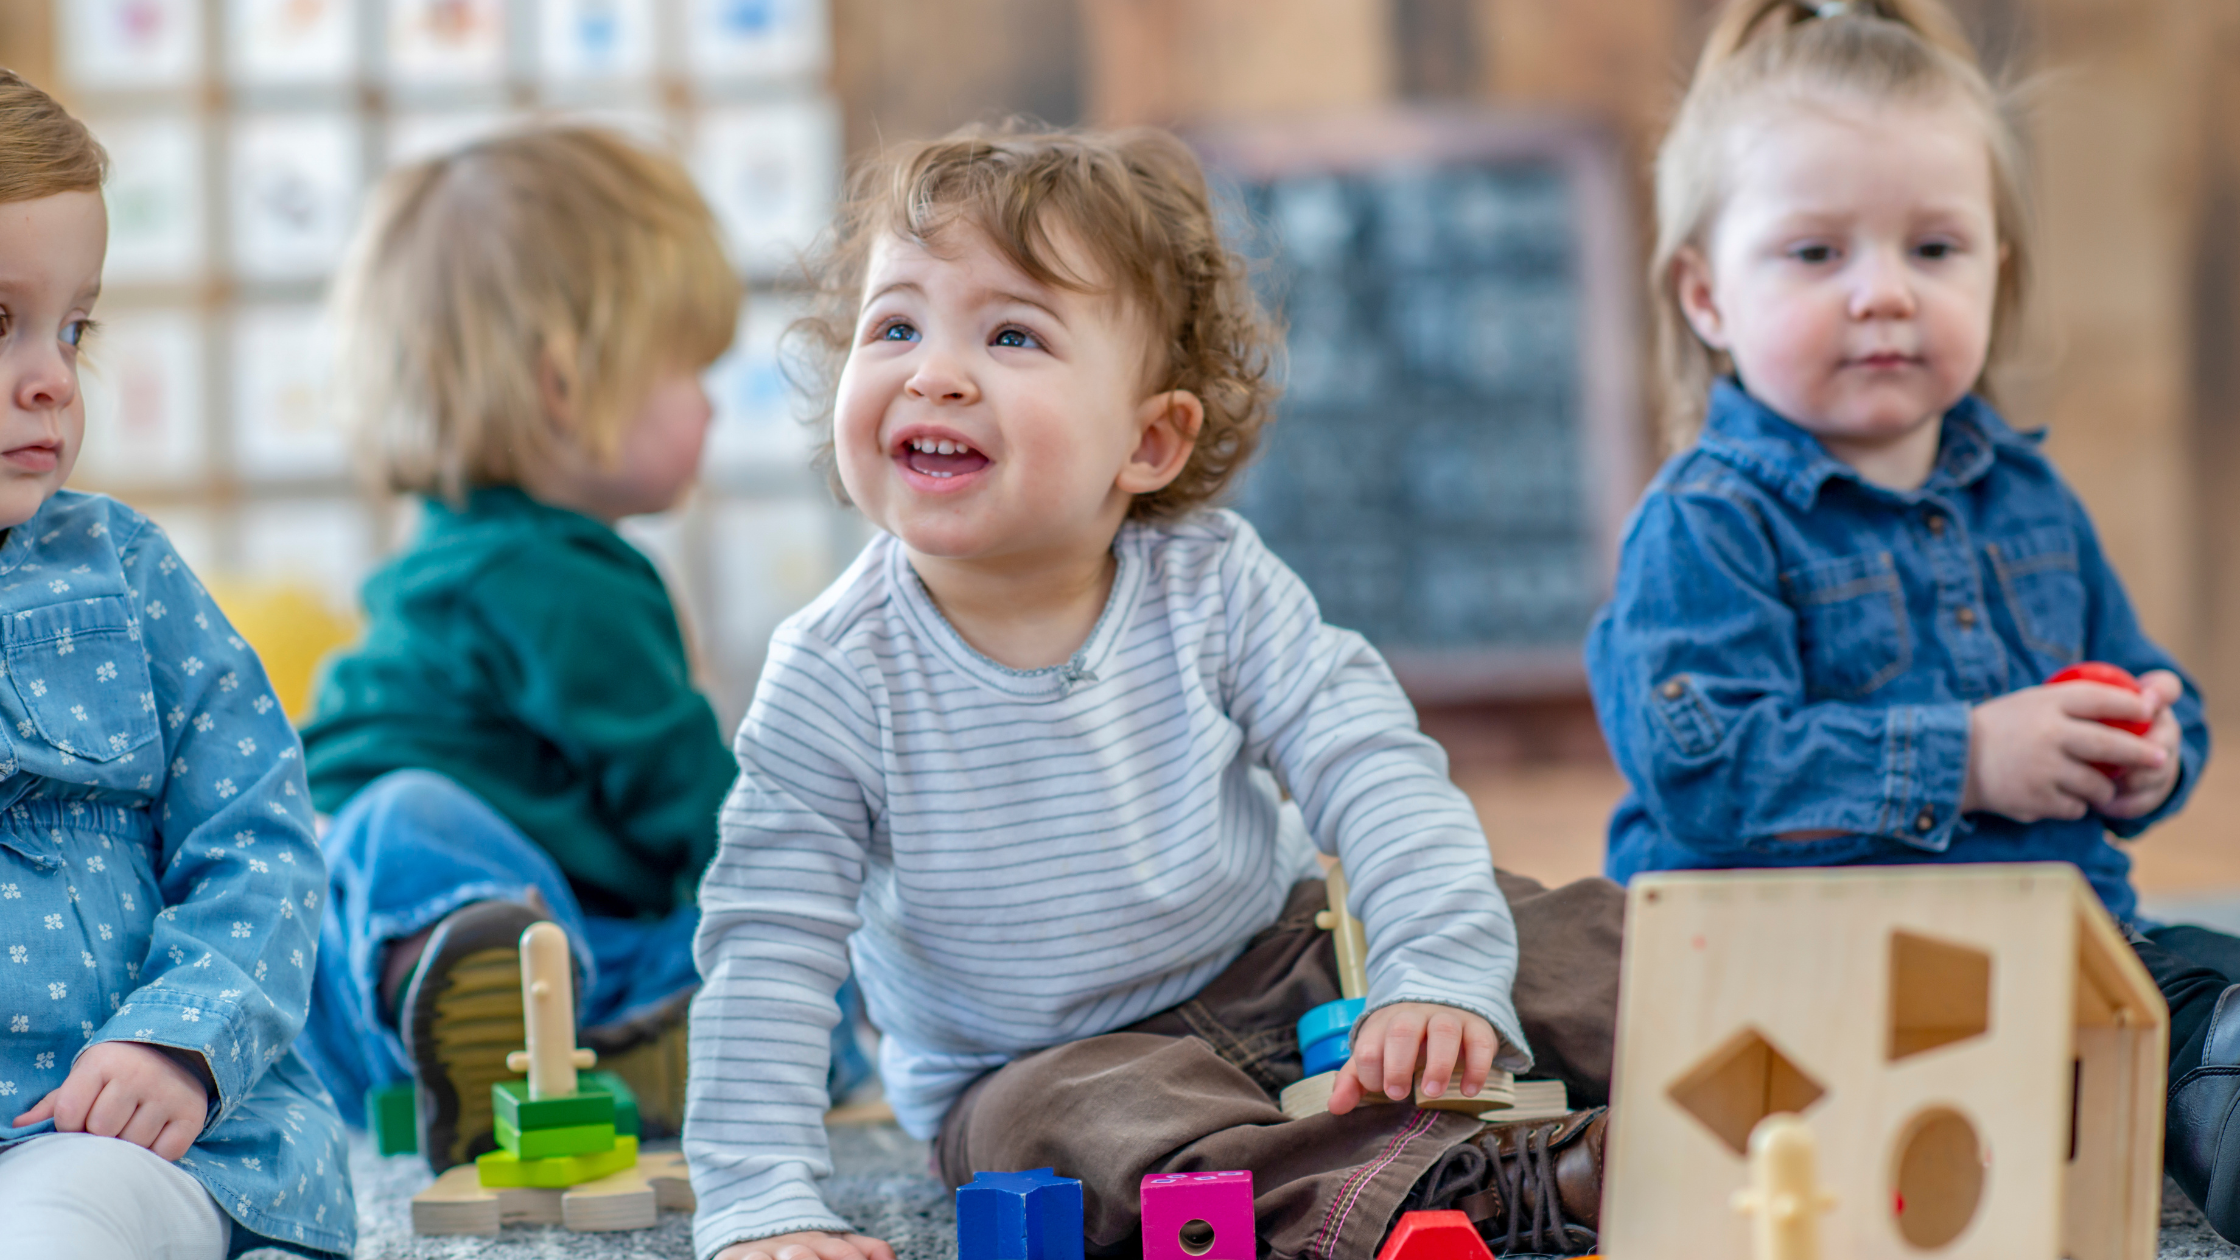 Four toddlers playing at nursery